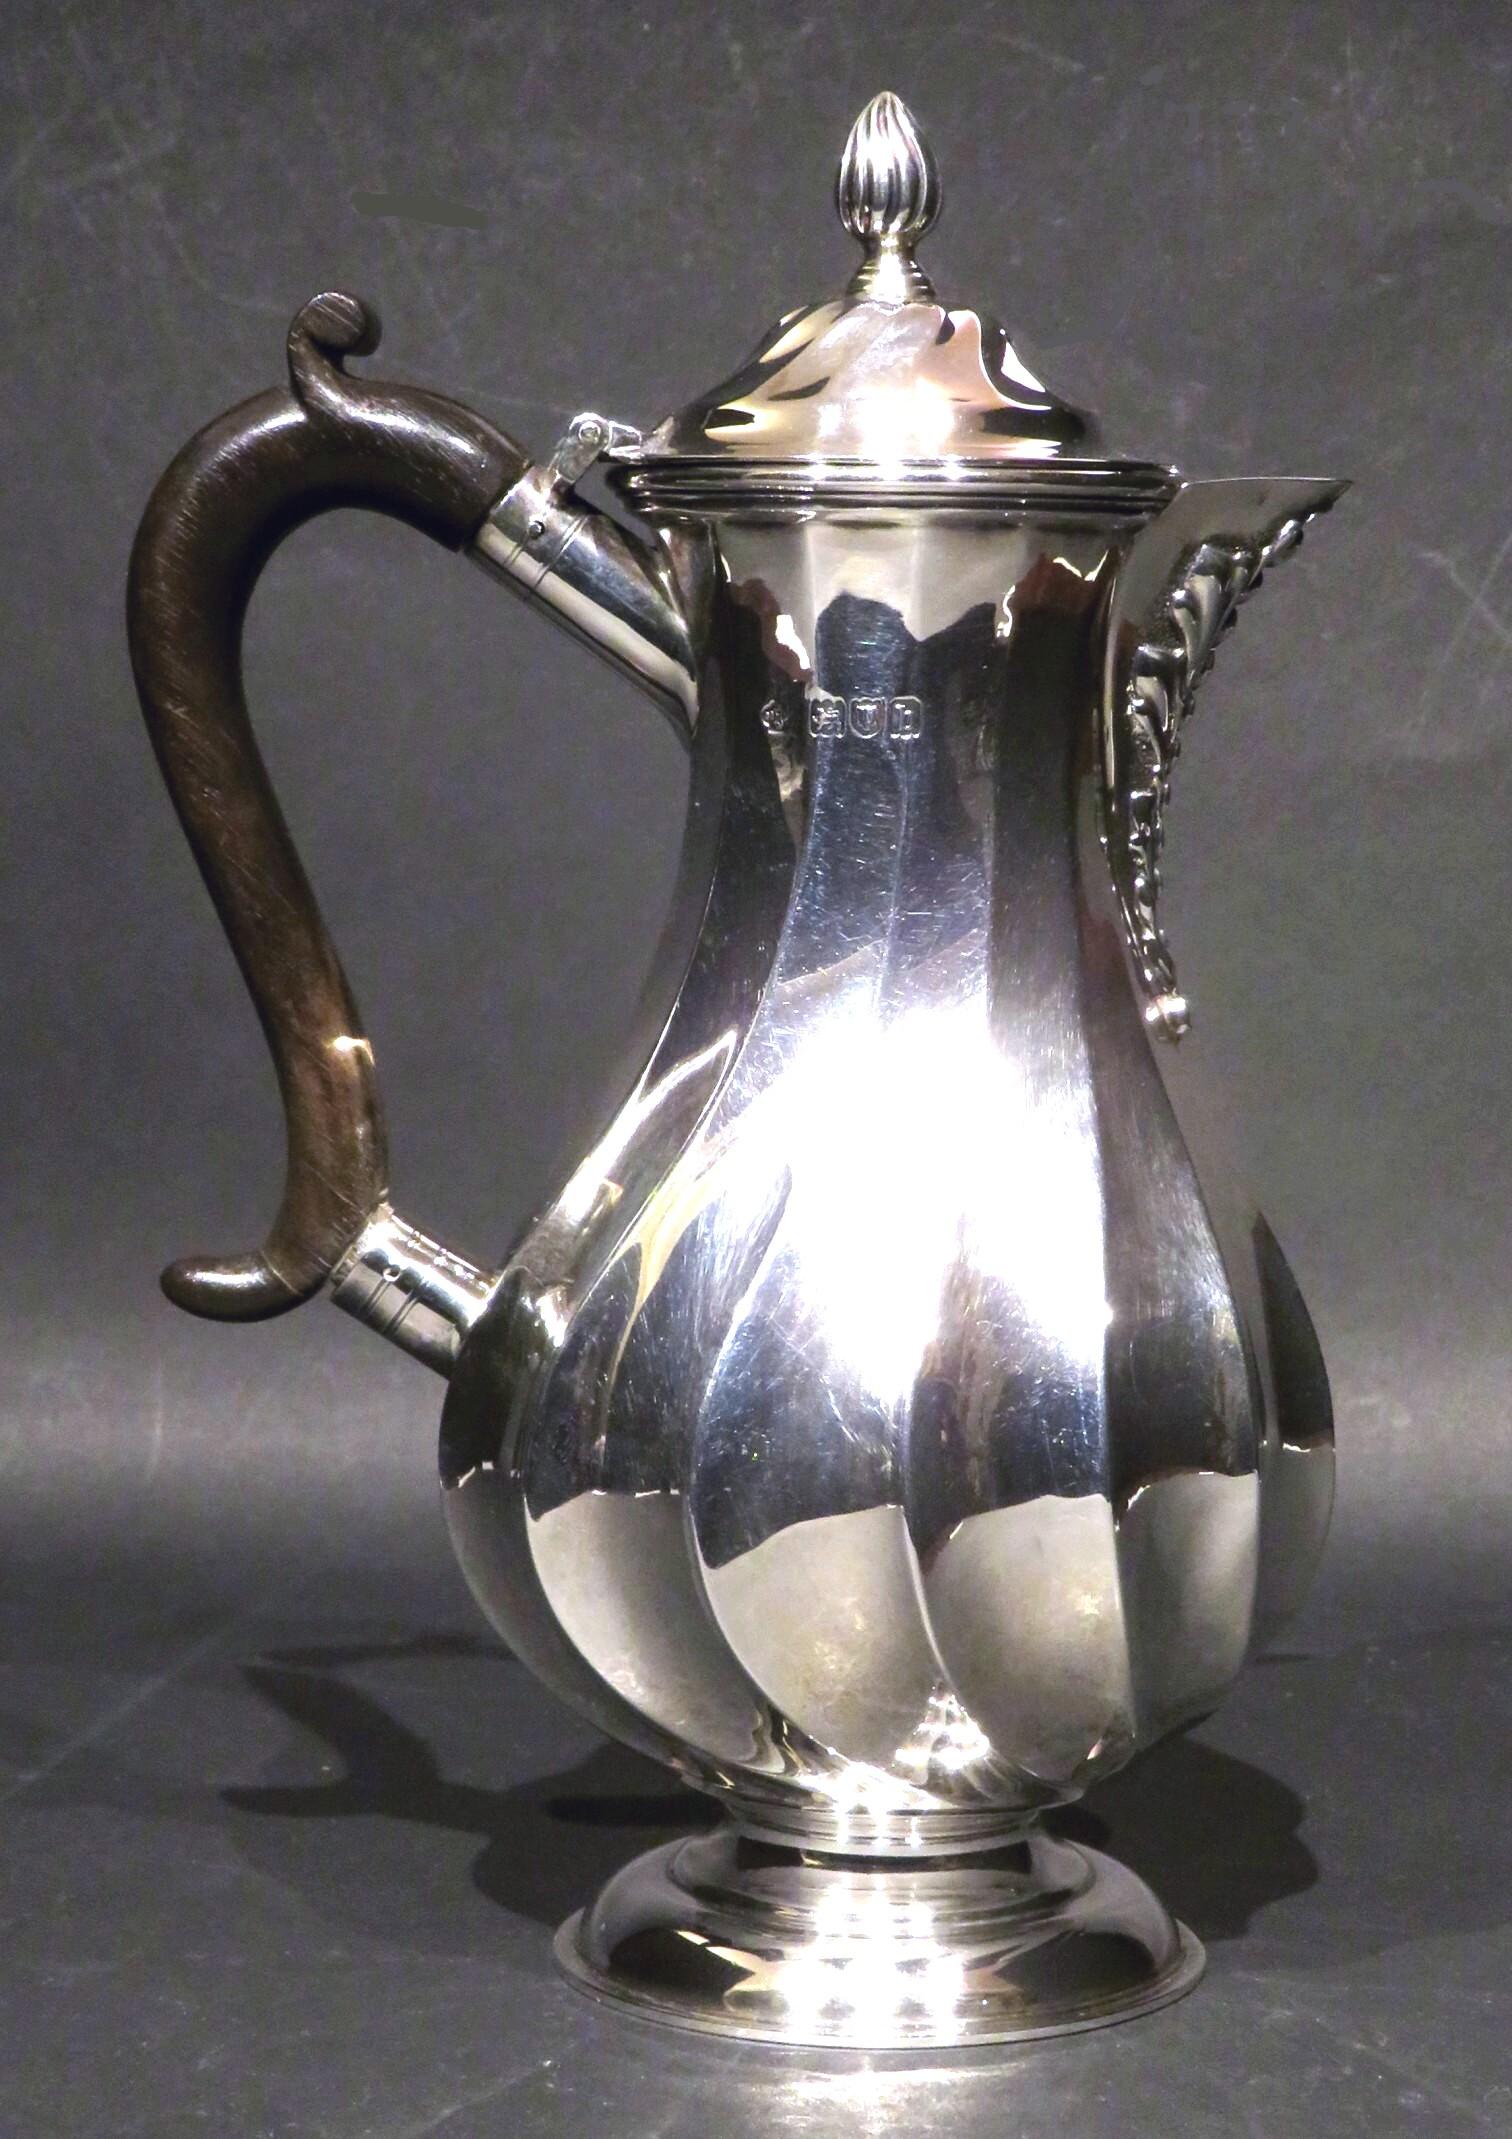 A stunning Arts & Crafts Period sterling silver hot water / hot milk pot showing a sculptural, baluster shaped body expertly worked with swirling fluted panels, rising to a conforming hinged top above a spout with embossed organic decoration, sided